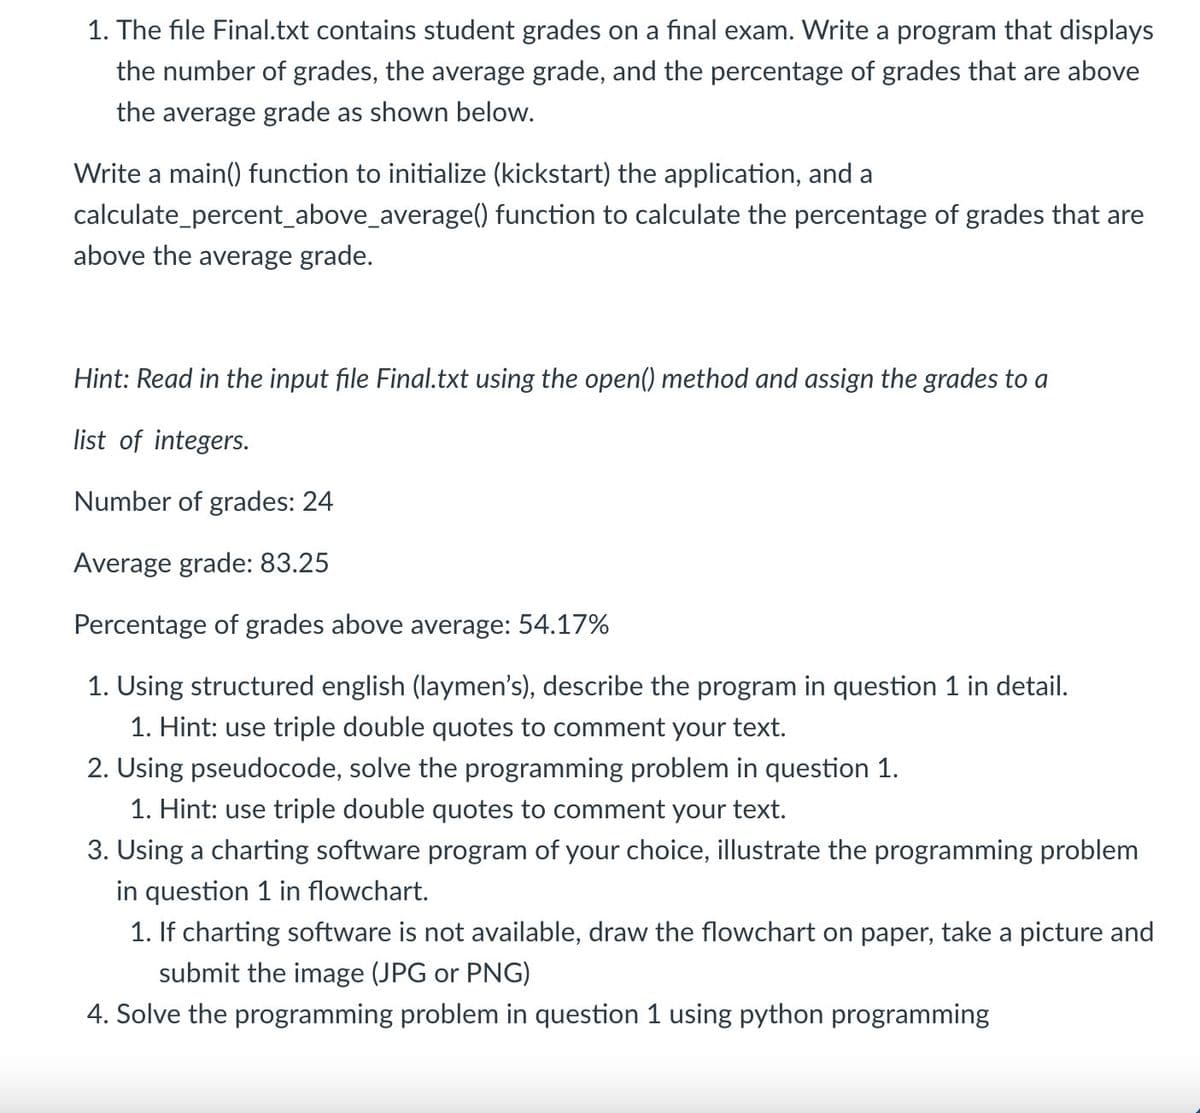 1. The file Final.txt contains student grades on a final exam. Write a program that displays
the number of grades, the average grade, and the percentage of grades that are above
the average grade as shown below.
Write a main() function to initialize (kickstart) the application, and a
calculate_percent_above_average() function to calculate the percentage of grades that are
above the average grade.
Hint: Read in the input file Final.txt using the open() method and assign the grades to a
list of integers.
Number of grades: 24
Average grade: 83.25
Percentage of grades above average: 54.17%
1. Using structured english (laymen's), describe the program in question 1 in detail.
1. Hint: use triple double quotes to comment your text.
2. Using pseudocode, solve the programming problem in question 1.
1. Hint: use triple double quotes to comment your text.
3. Using a charting software program of your choice, illustrate the programming problem
in question 1 in flowchart.
1. If charting software is not available, draw the flowchart on paper, take a picture and
submit the image (JPG or PNG)
4. Solve the programming problem in question 1 using python programming
